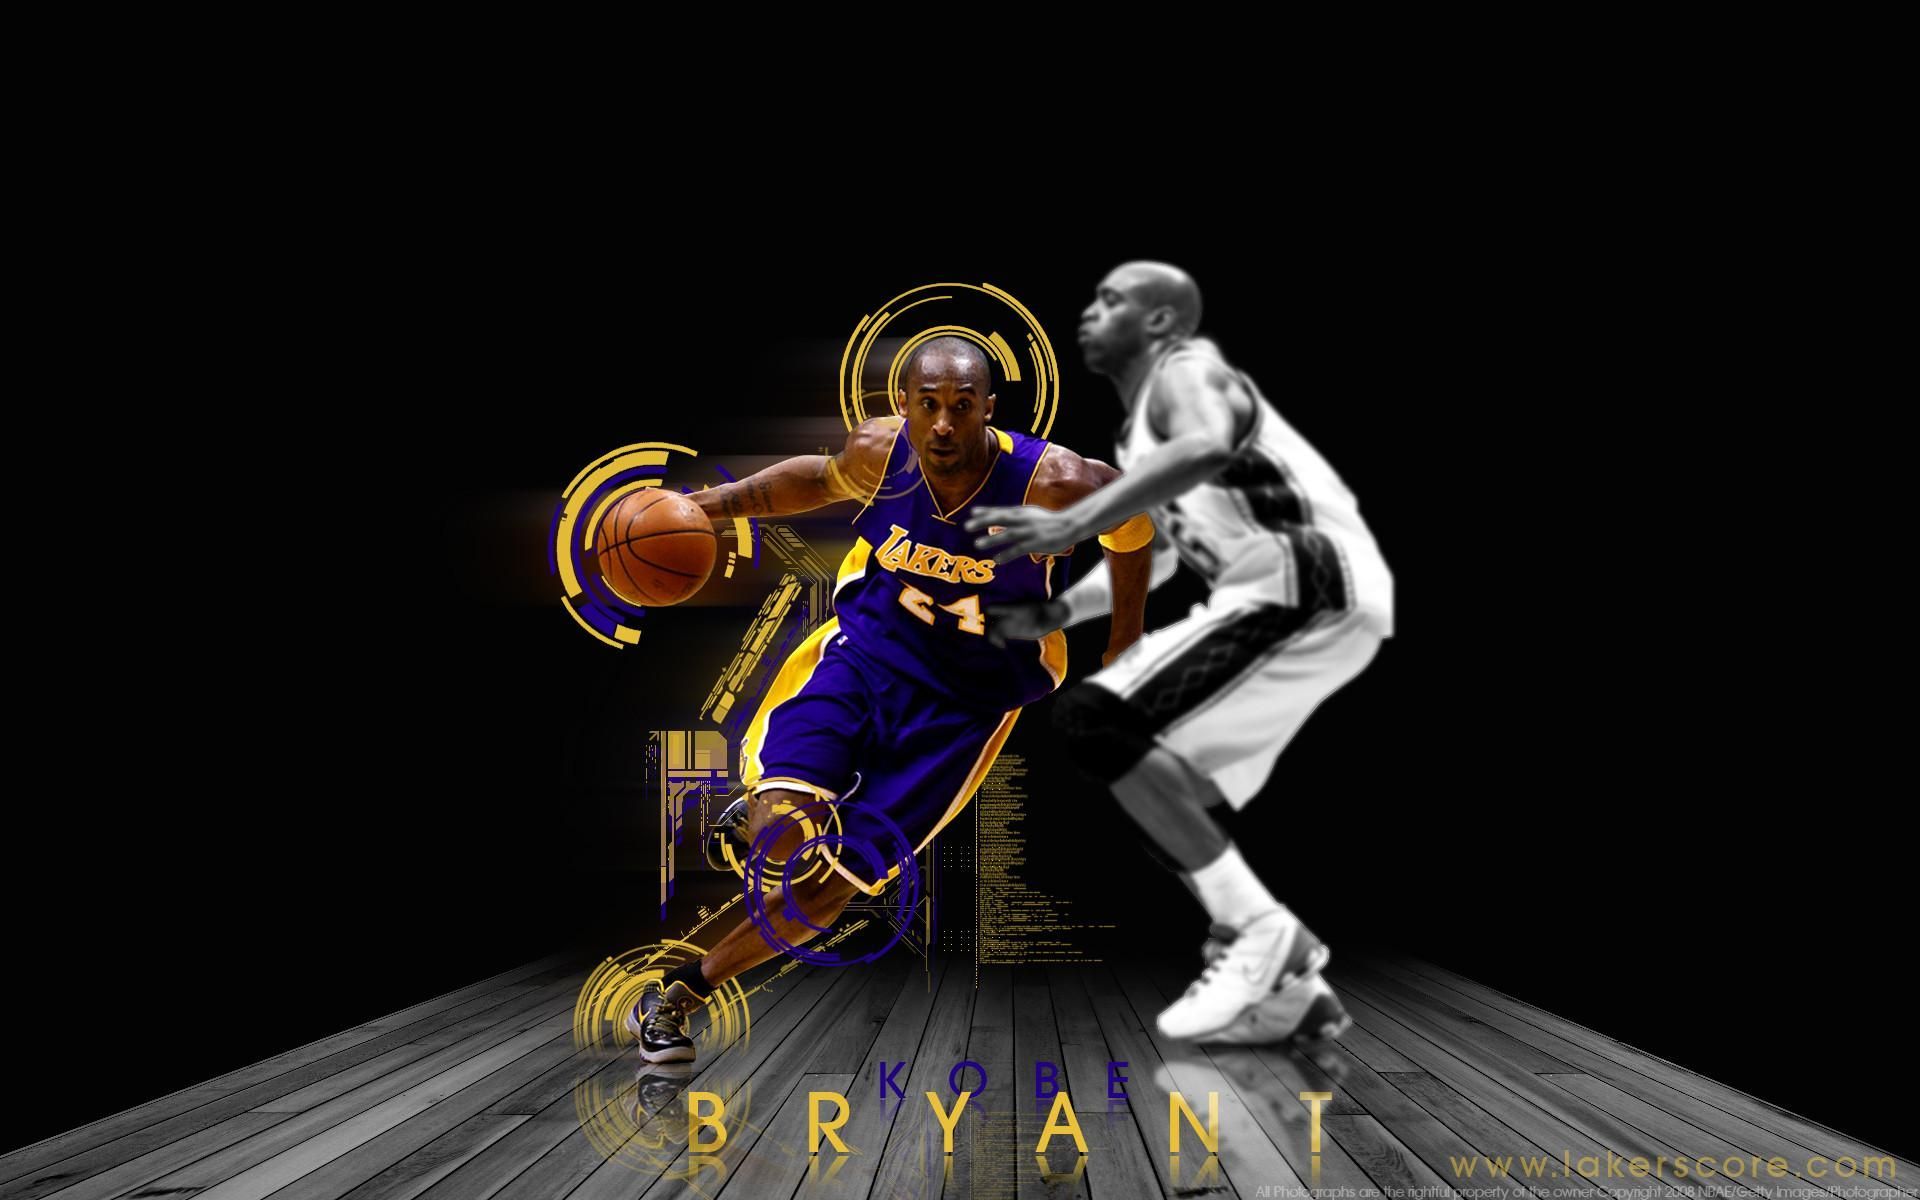 Kobe Bryant Lakers Wallpaper Hd Free Wallpapers Backgrounds Images